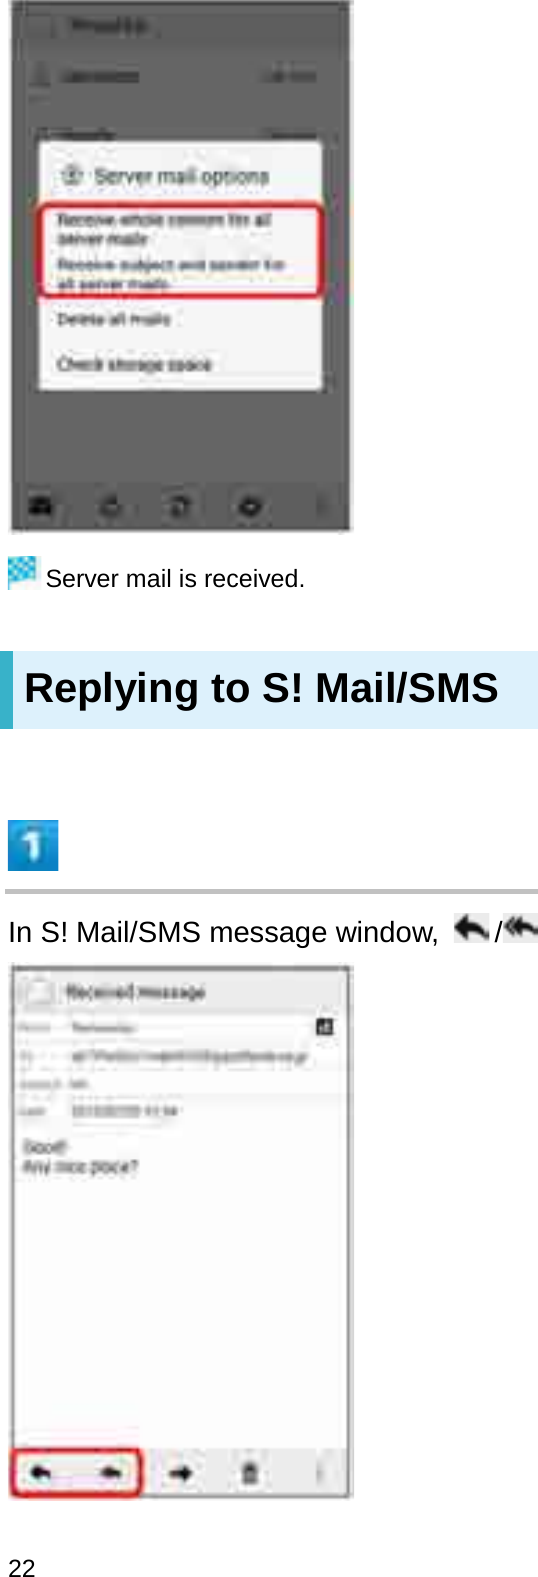 Server mail is received.Replying to S! Mail/SMSIn S! Mail/SMS message window,  /22